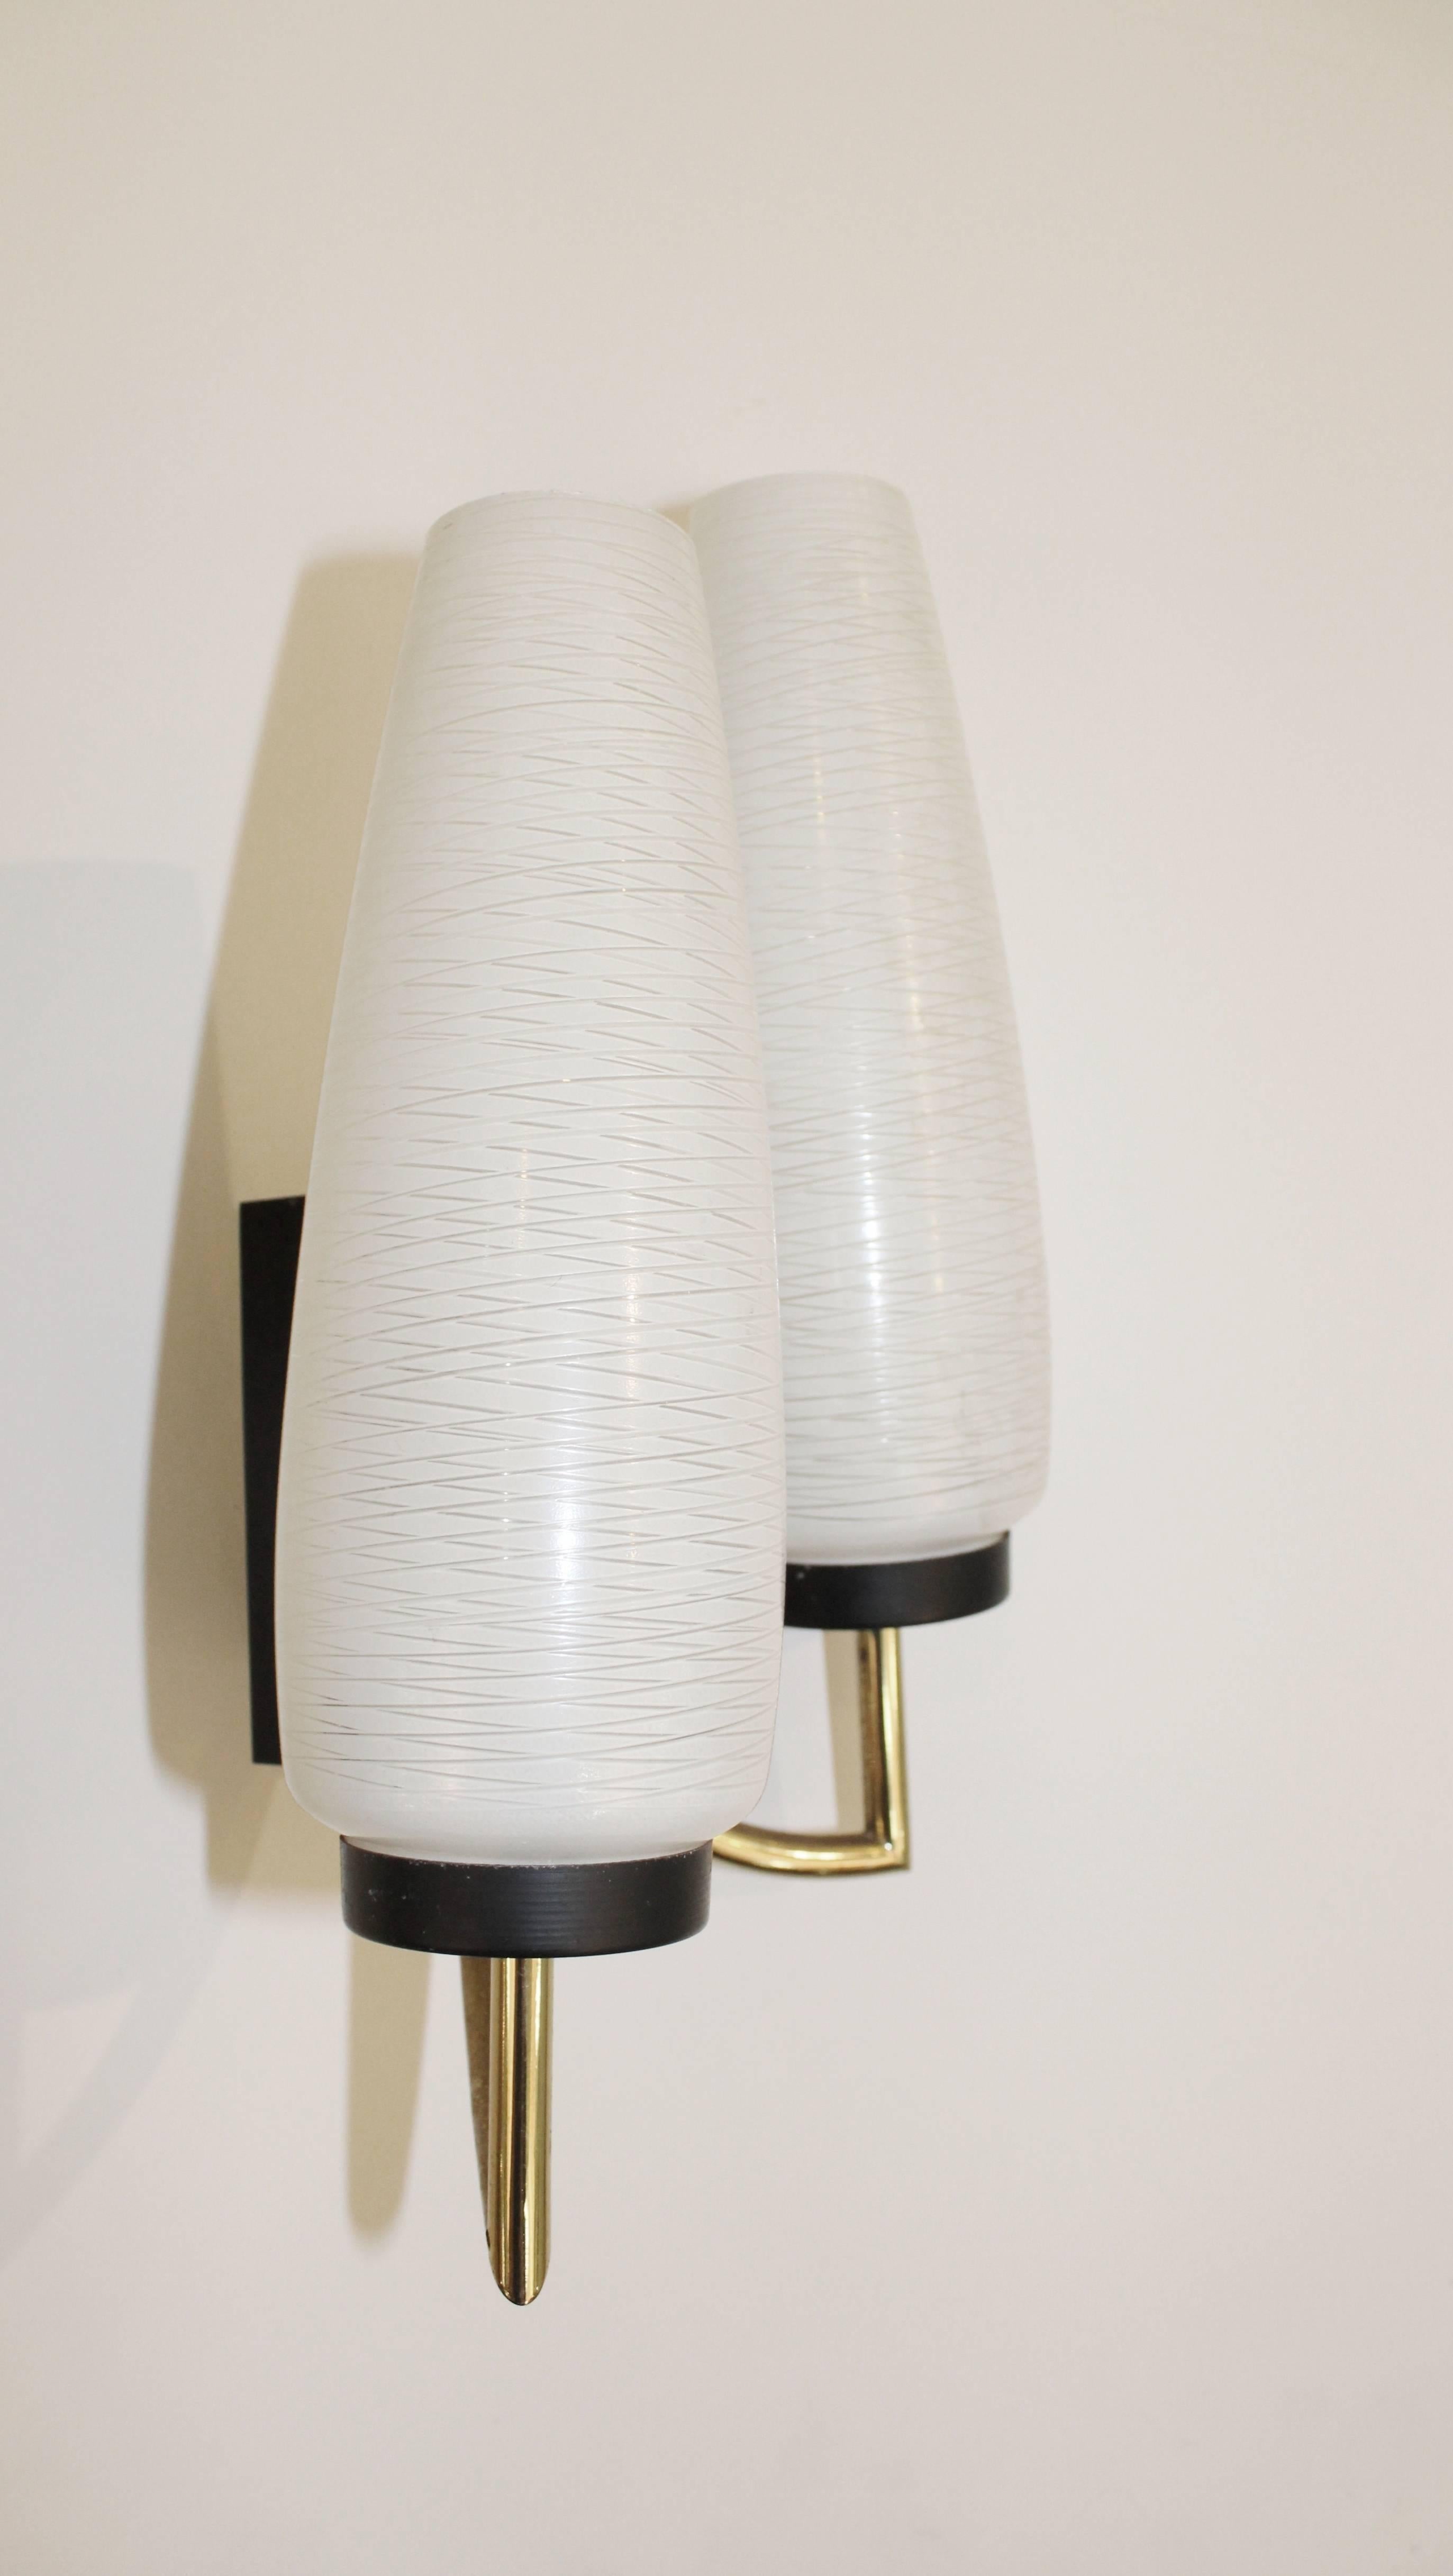 A pair of Mid-Century Modern, 1950s dual light wall sconces, featuring white glass tulip shades with decorative incising, on curved brass stems with black enameled accents and back plates. Excellent vintage condition, with age appropriate patina and